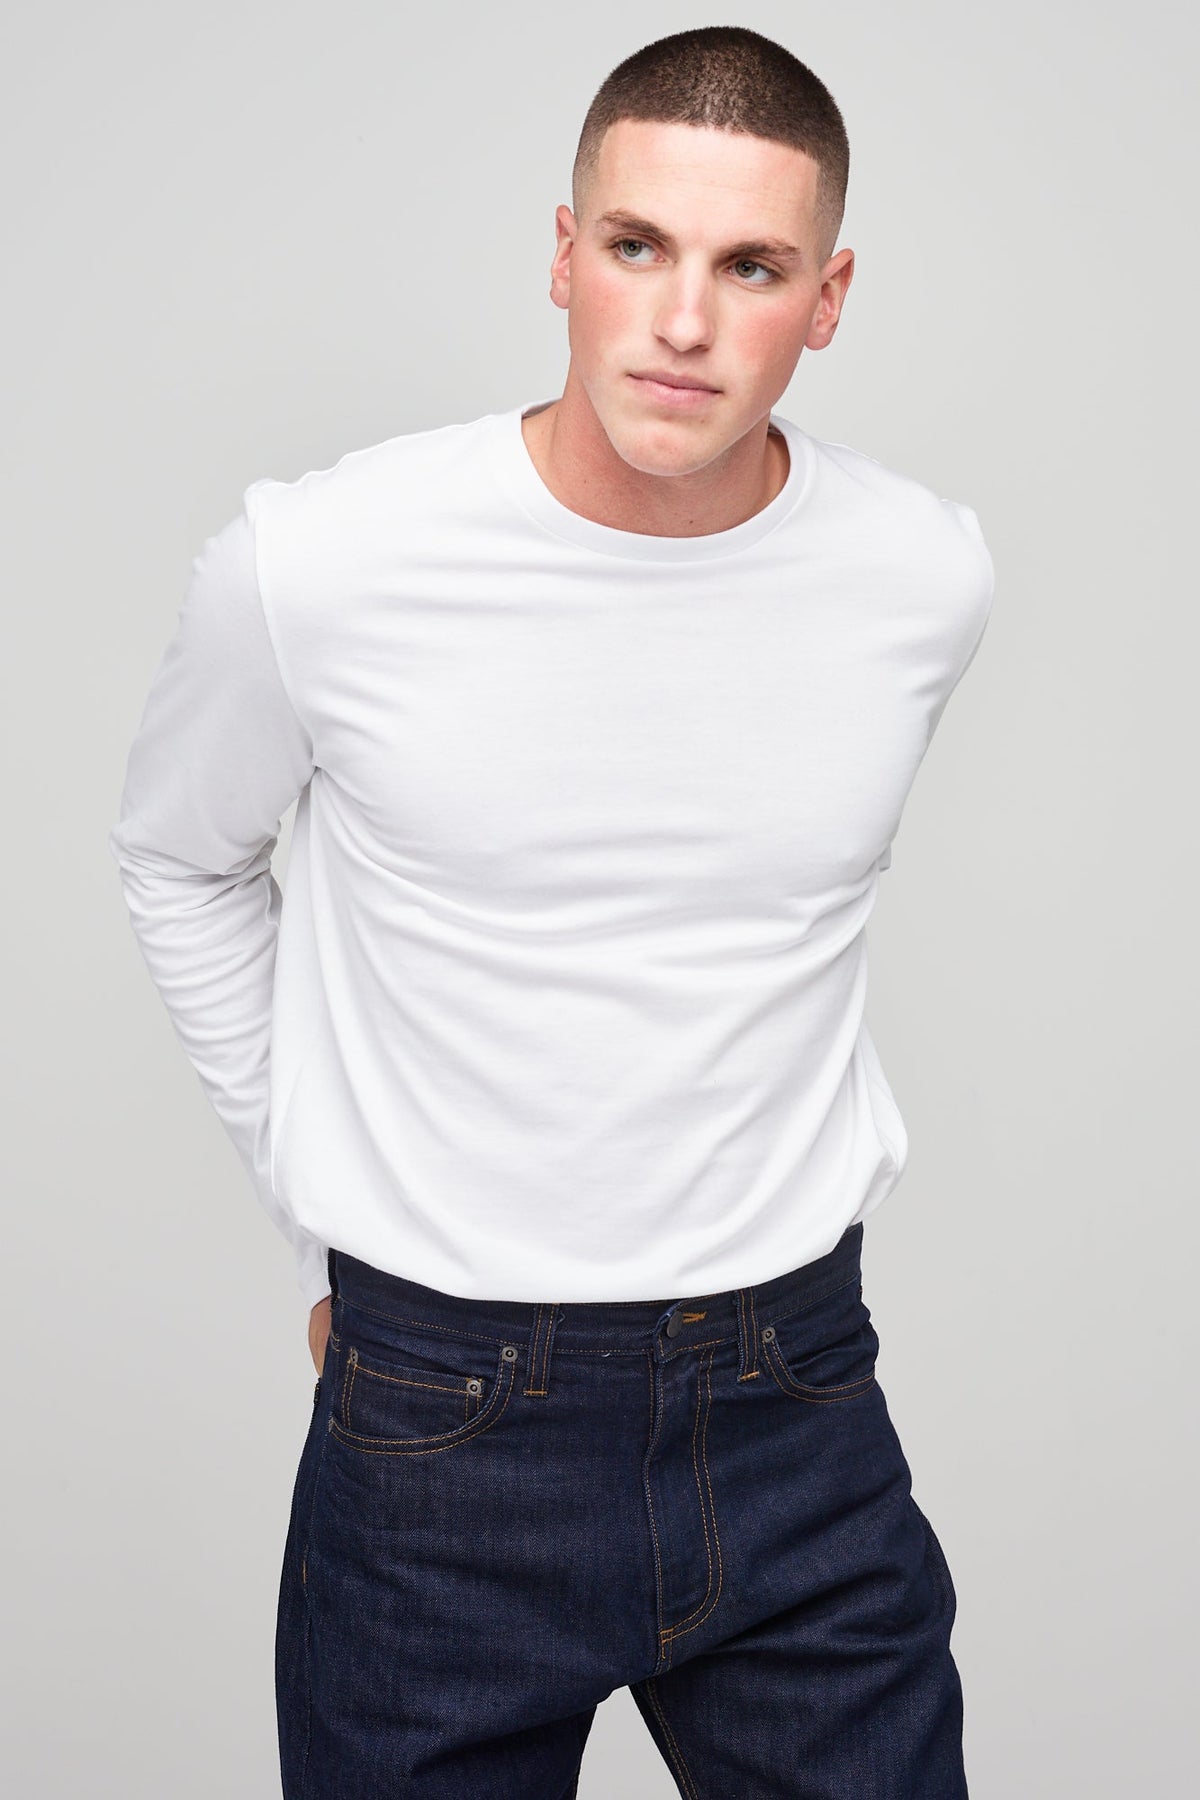 
            Brunet, white male wearing long sleeve t-shirt white tucked into with denim jeans 